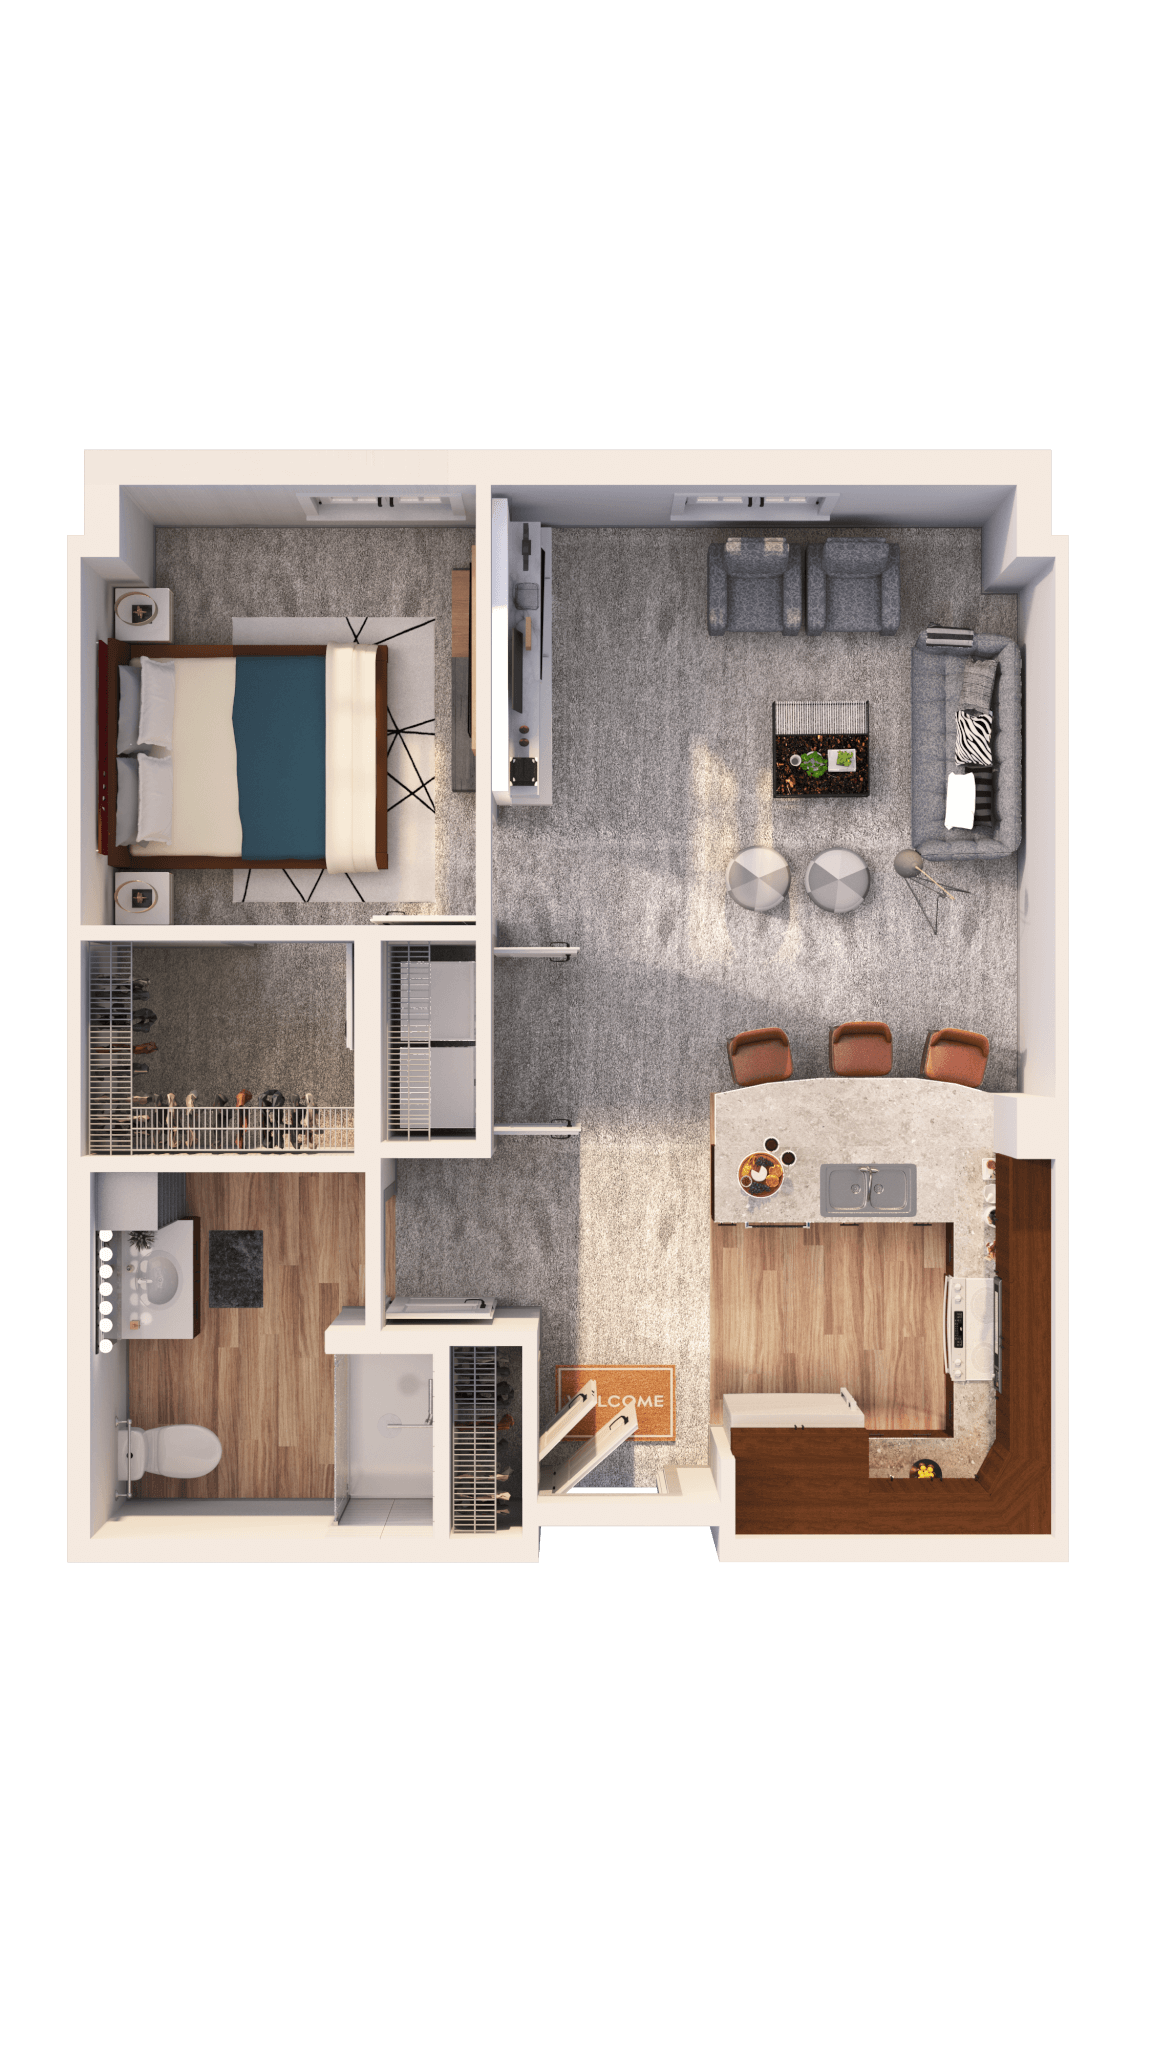 Assisted Living 1 Bedroom Apartment Floor Plan